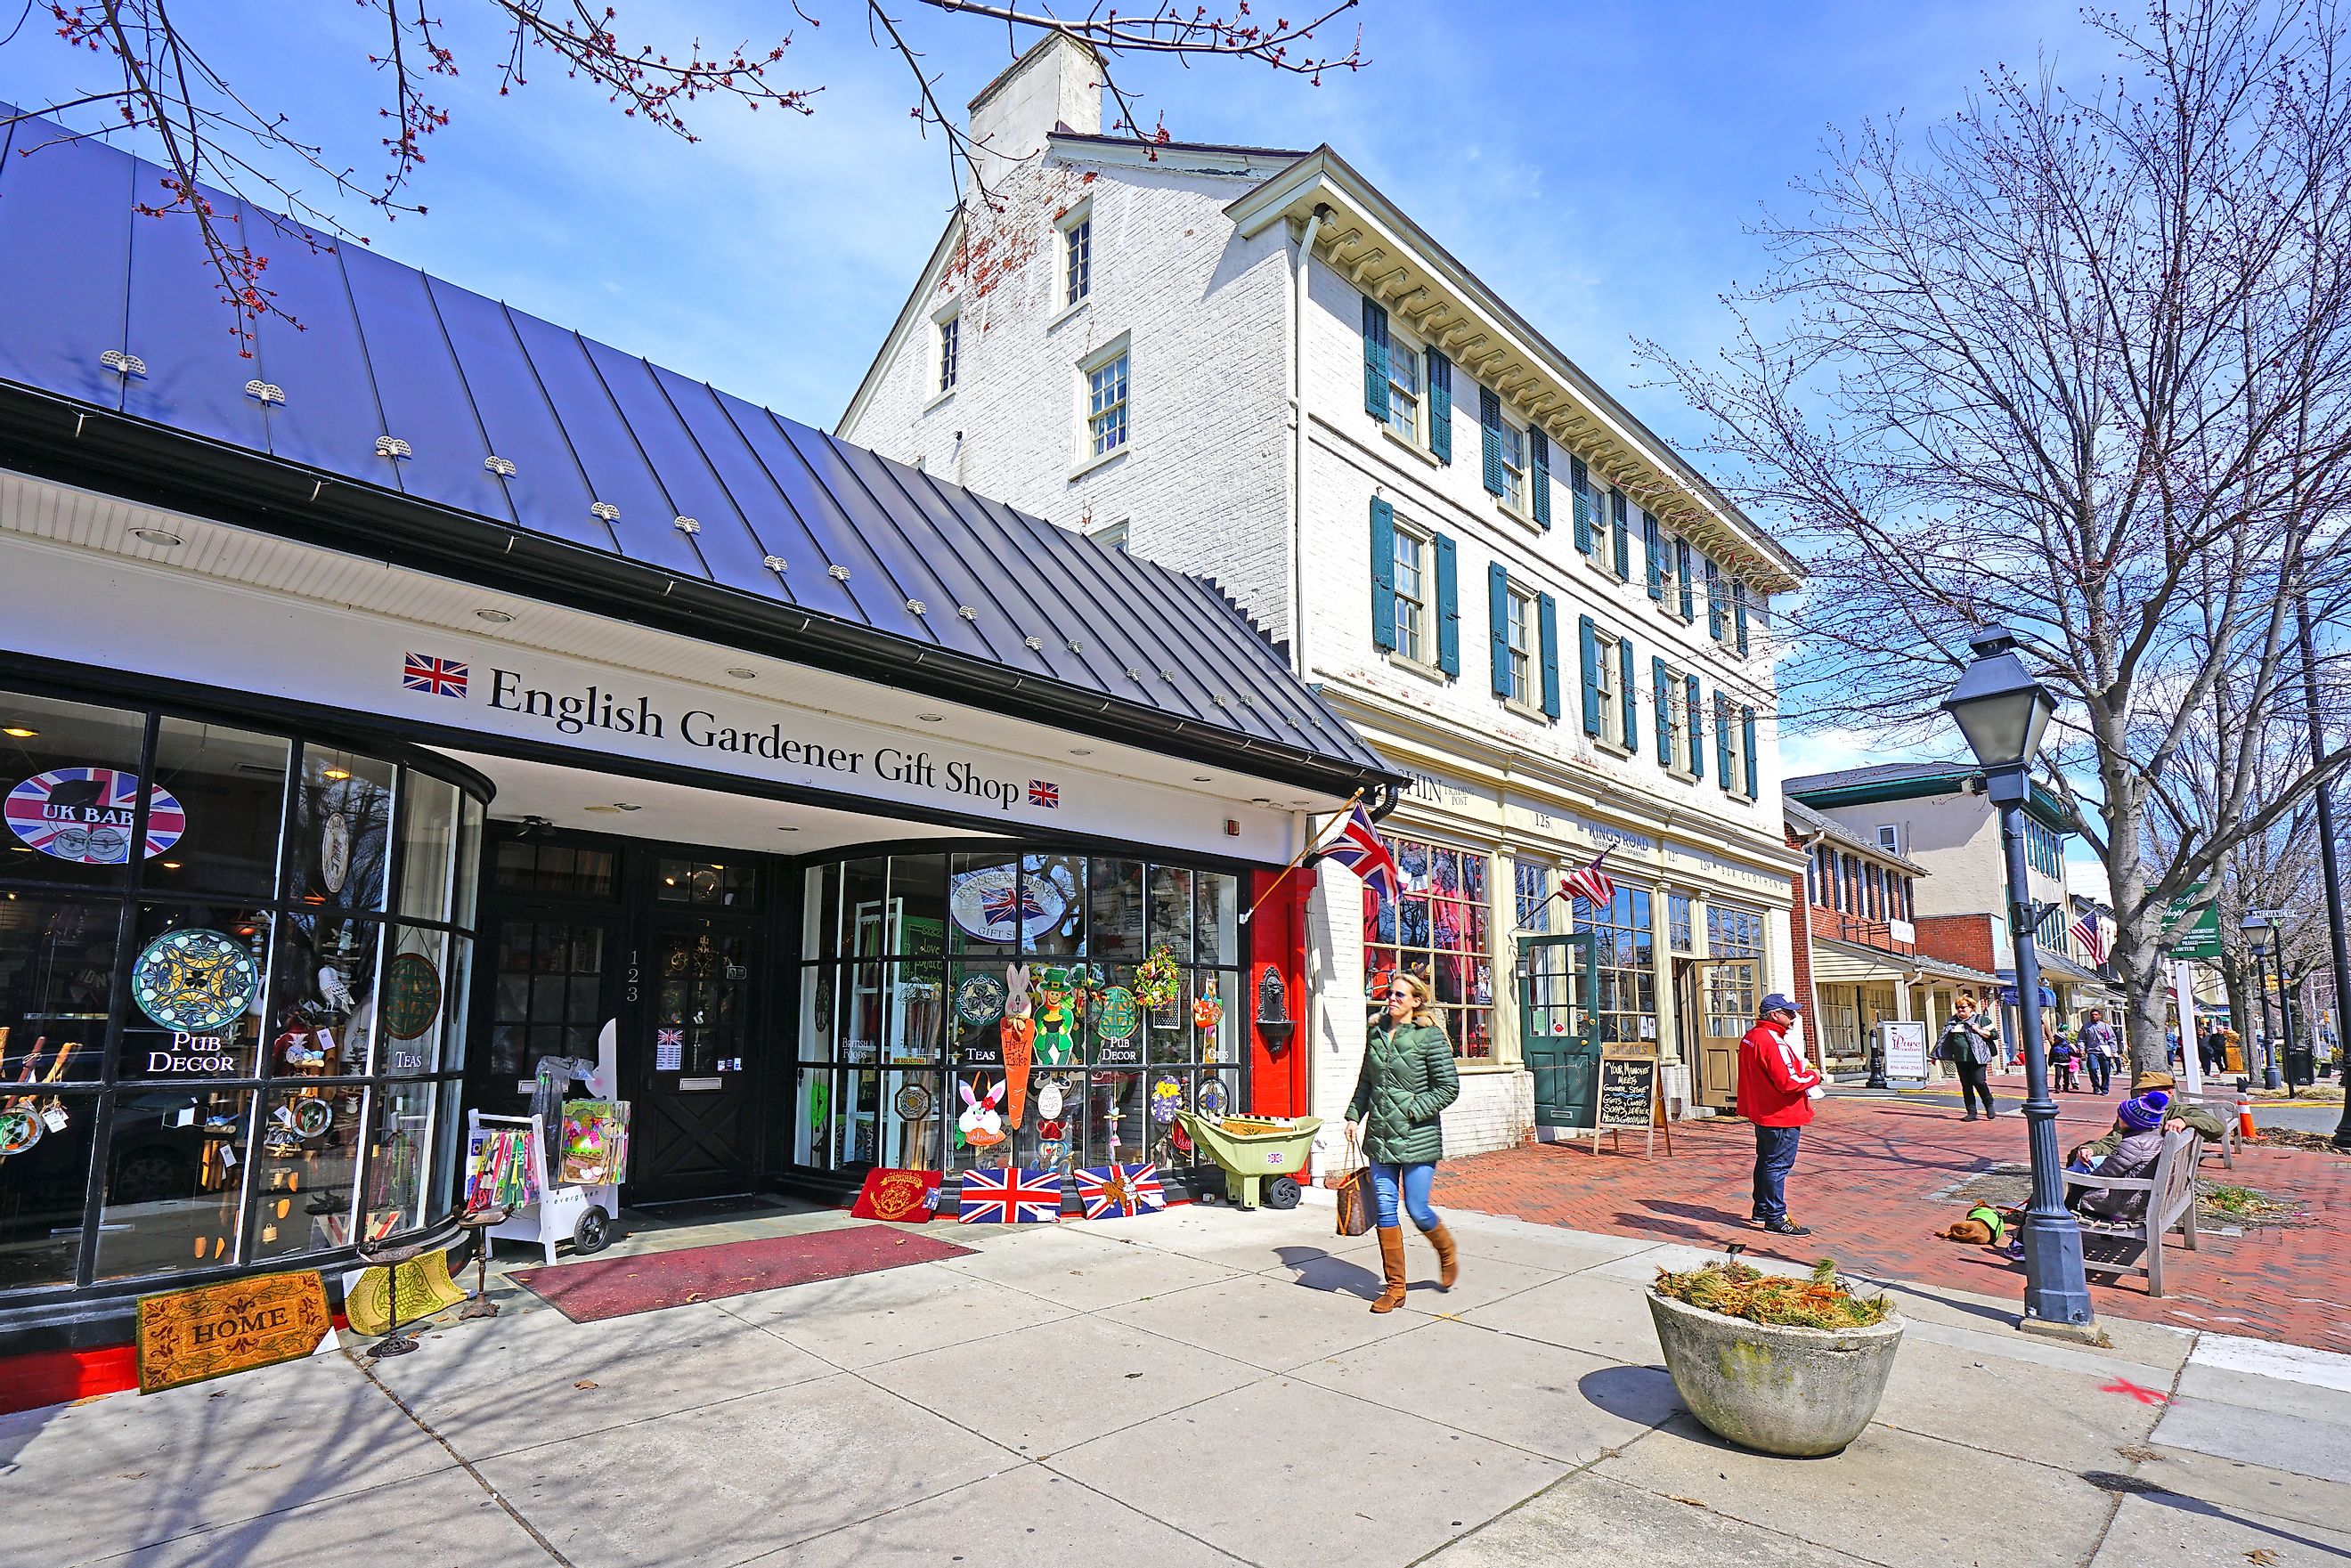 The historic town of Haddonfield, New Jersey. Editorial credit: EQRoy / Shutterstock.com